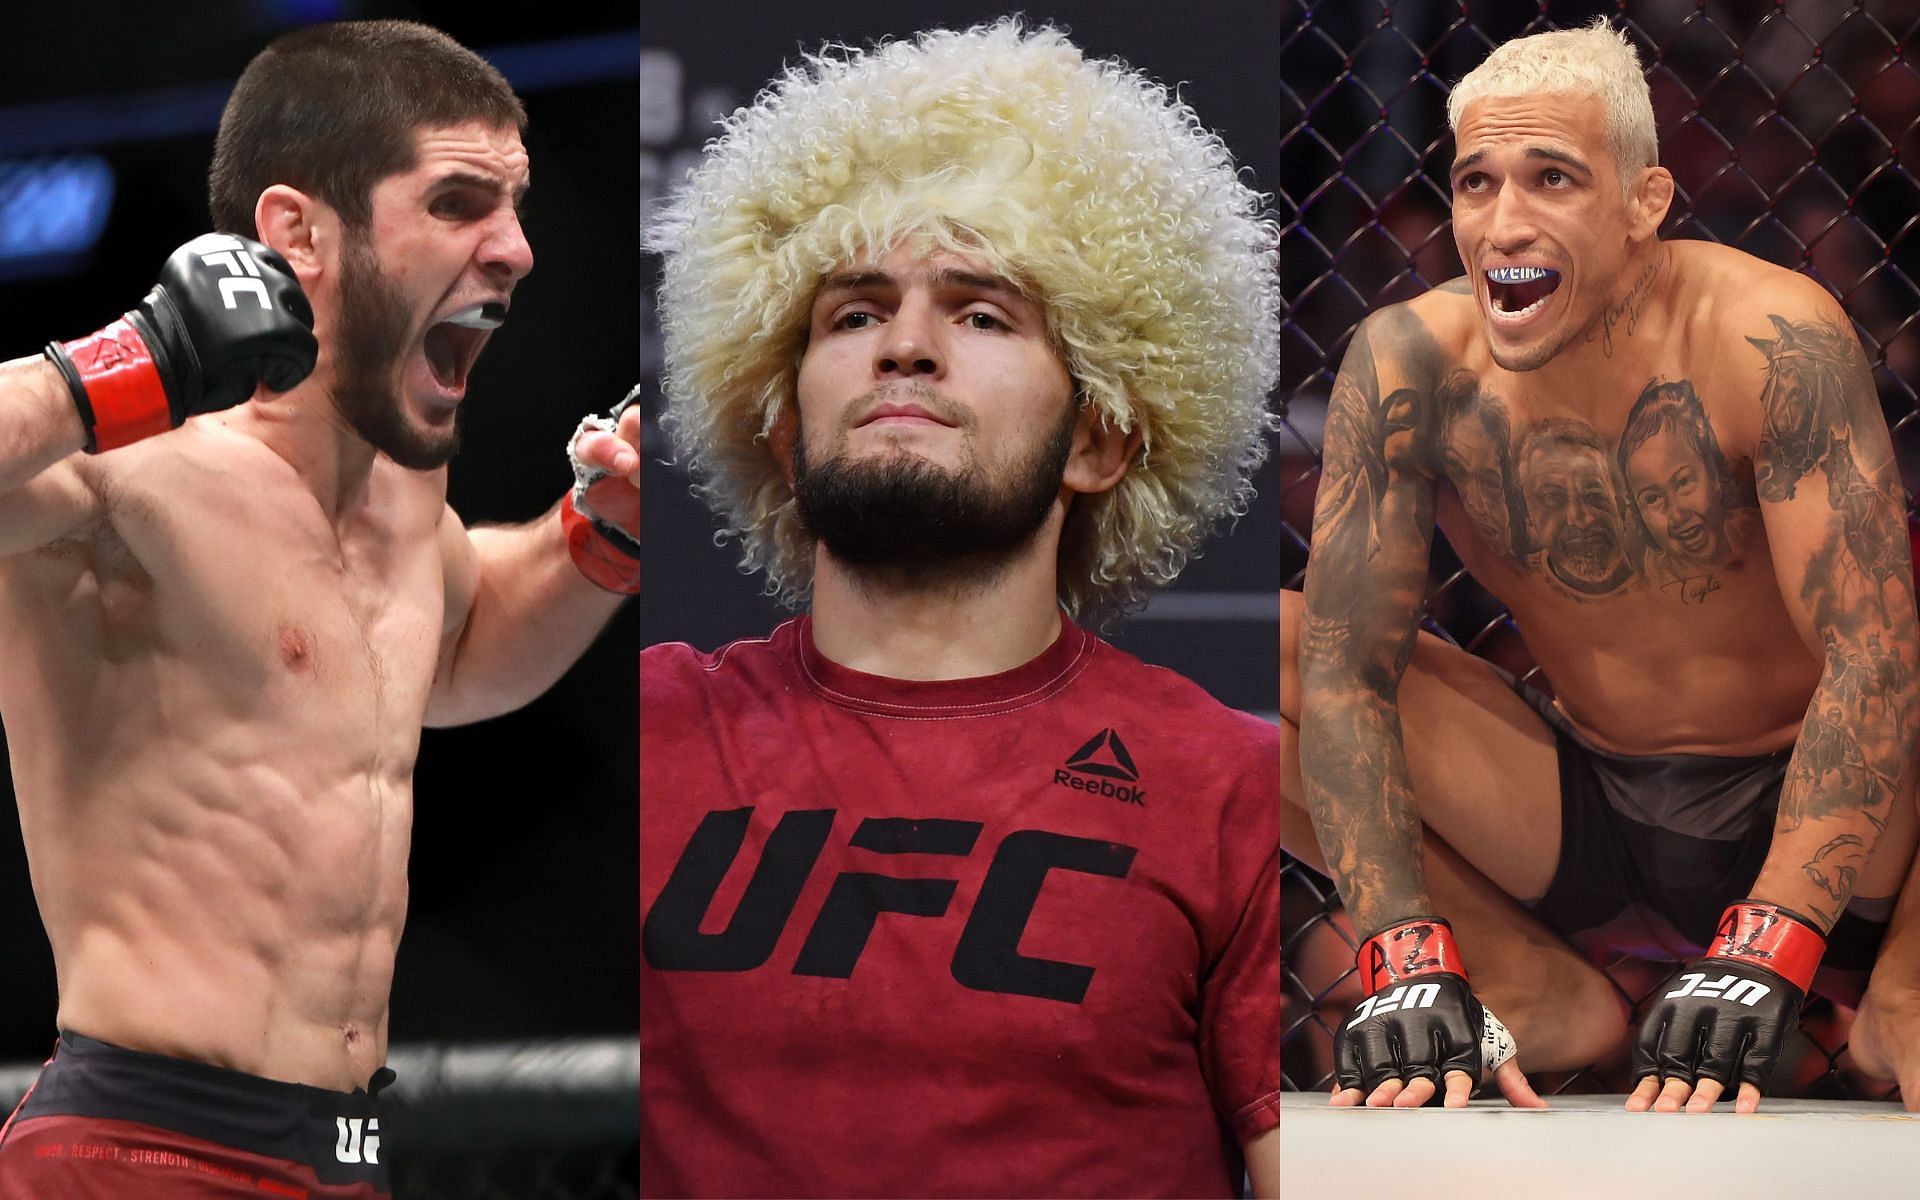 Charles Oliveira's coach appealed to Khabib Nurmagomedov and Islam Makhachev: "Come fight with us in Brazil" 
